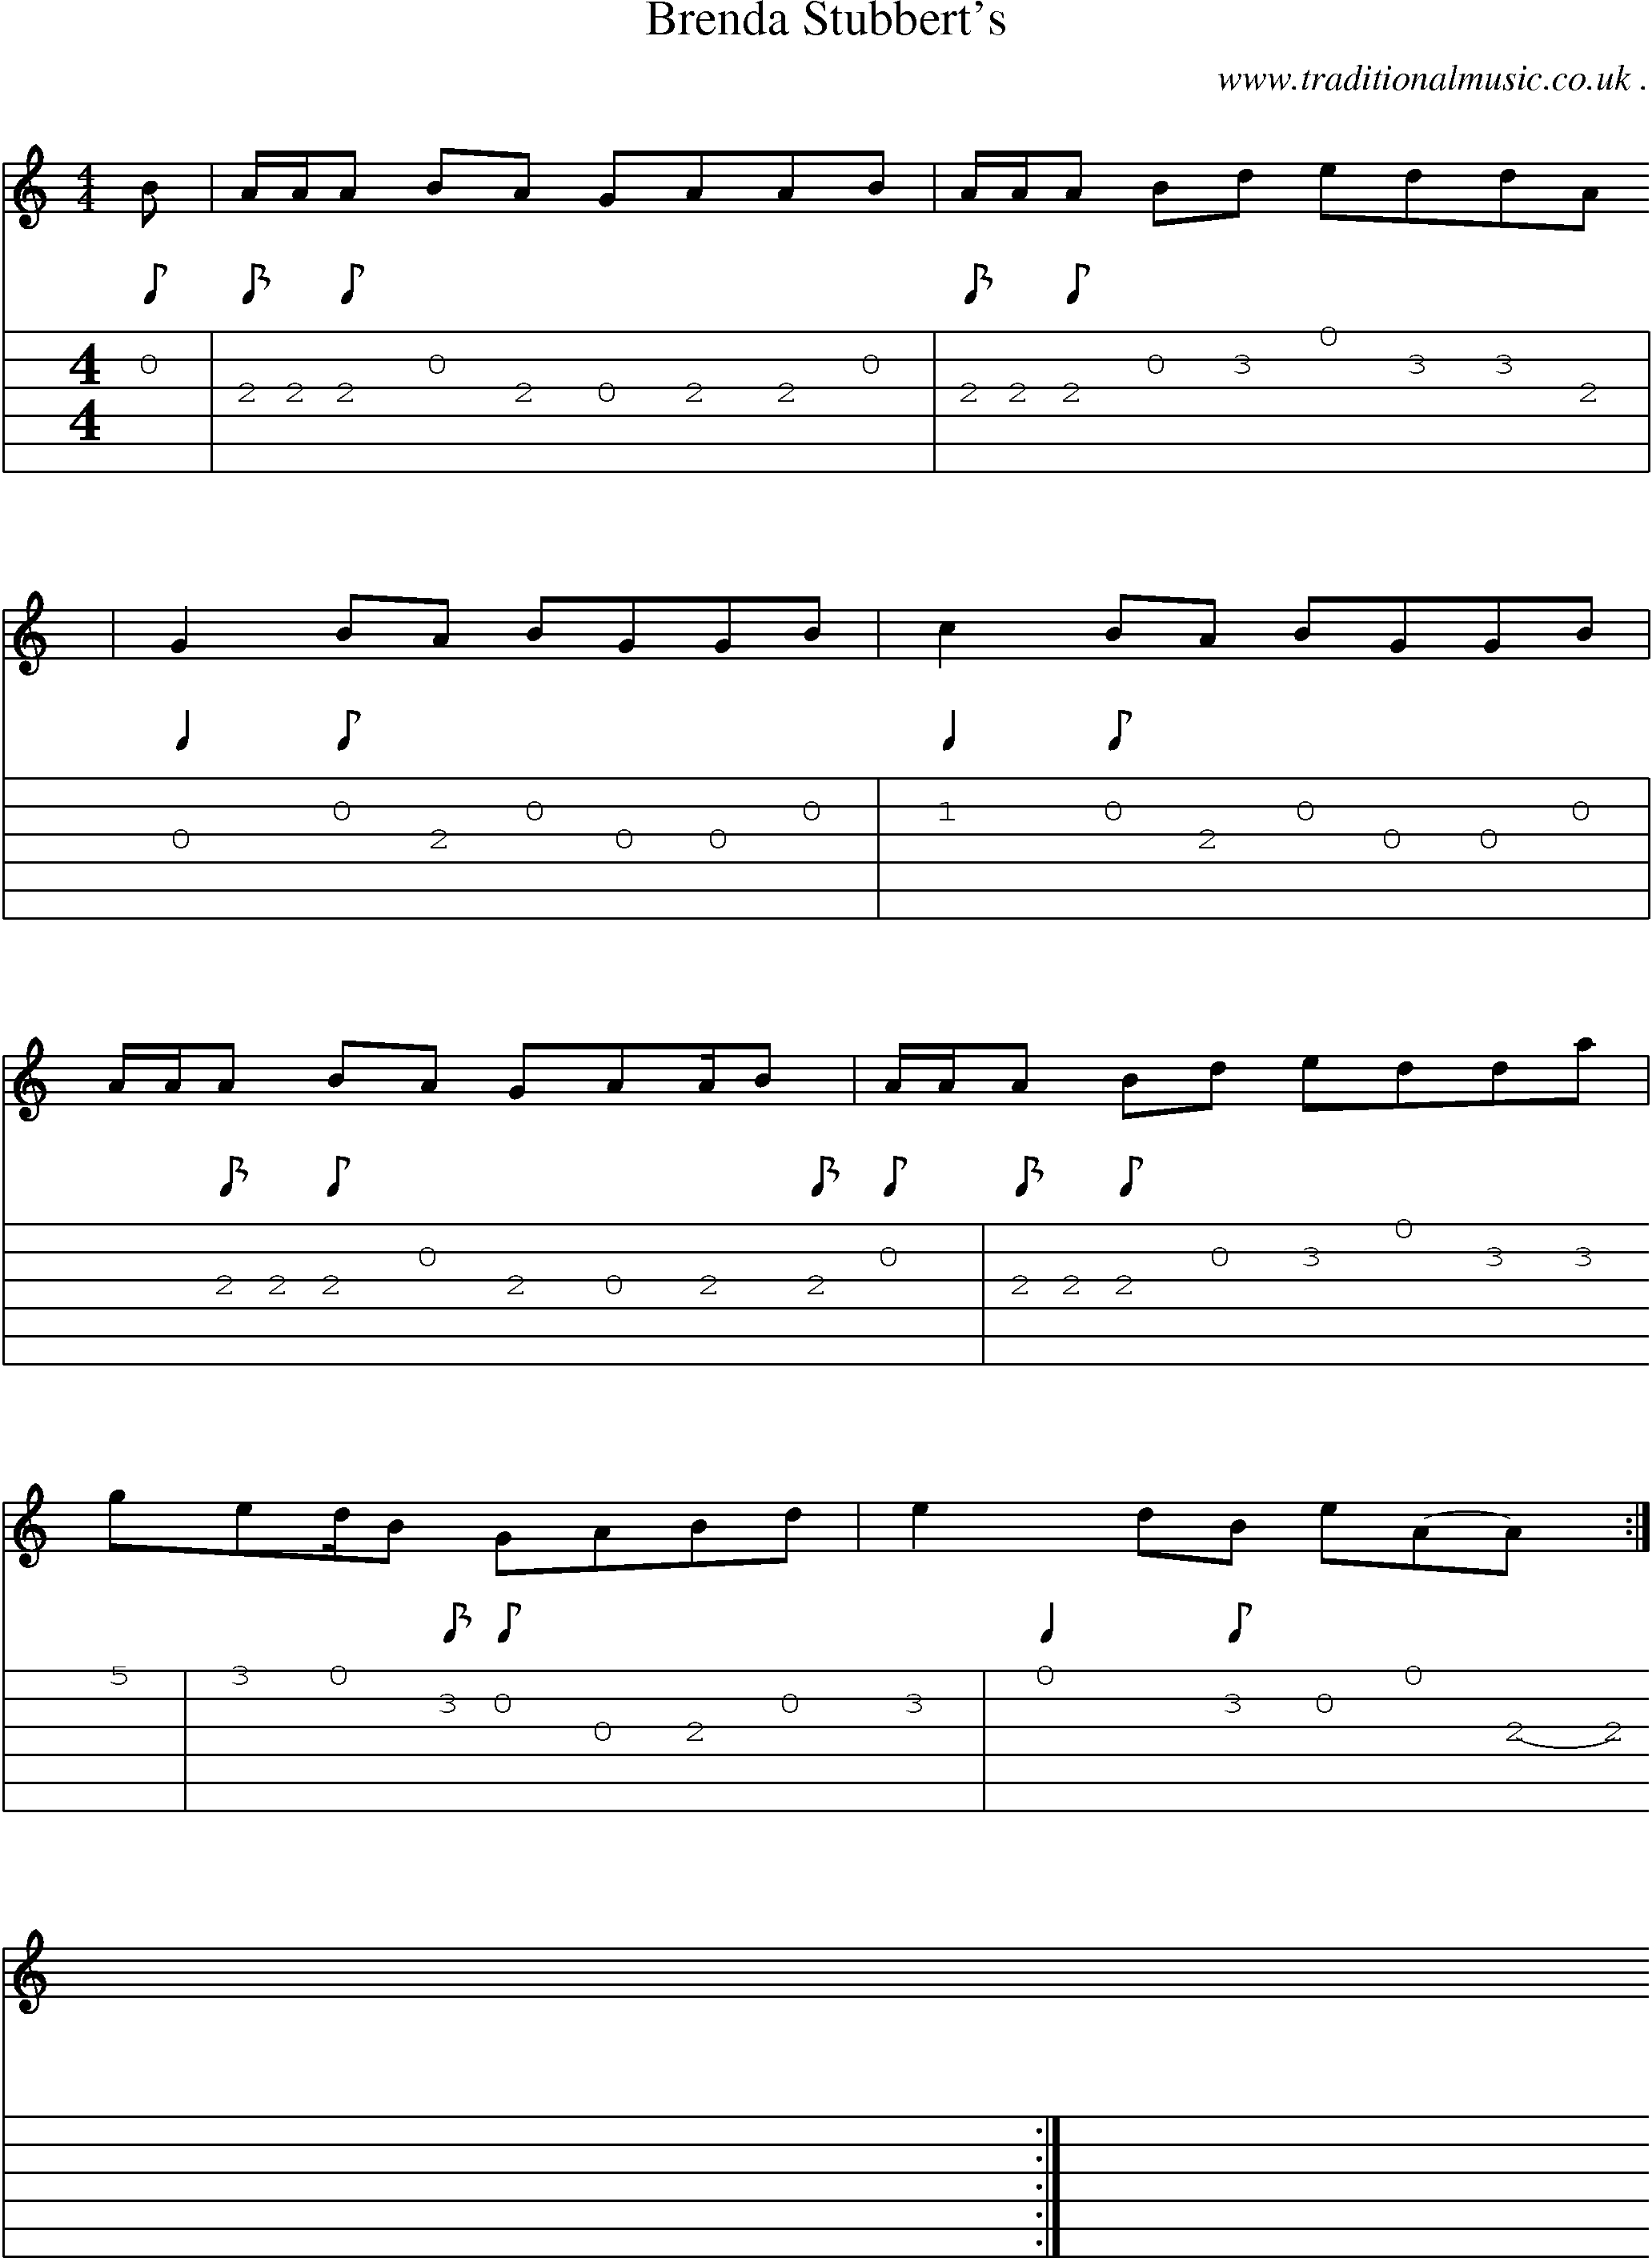 Sheet-music  score, Chords and Guitar Tabs for Brenda Stubberts